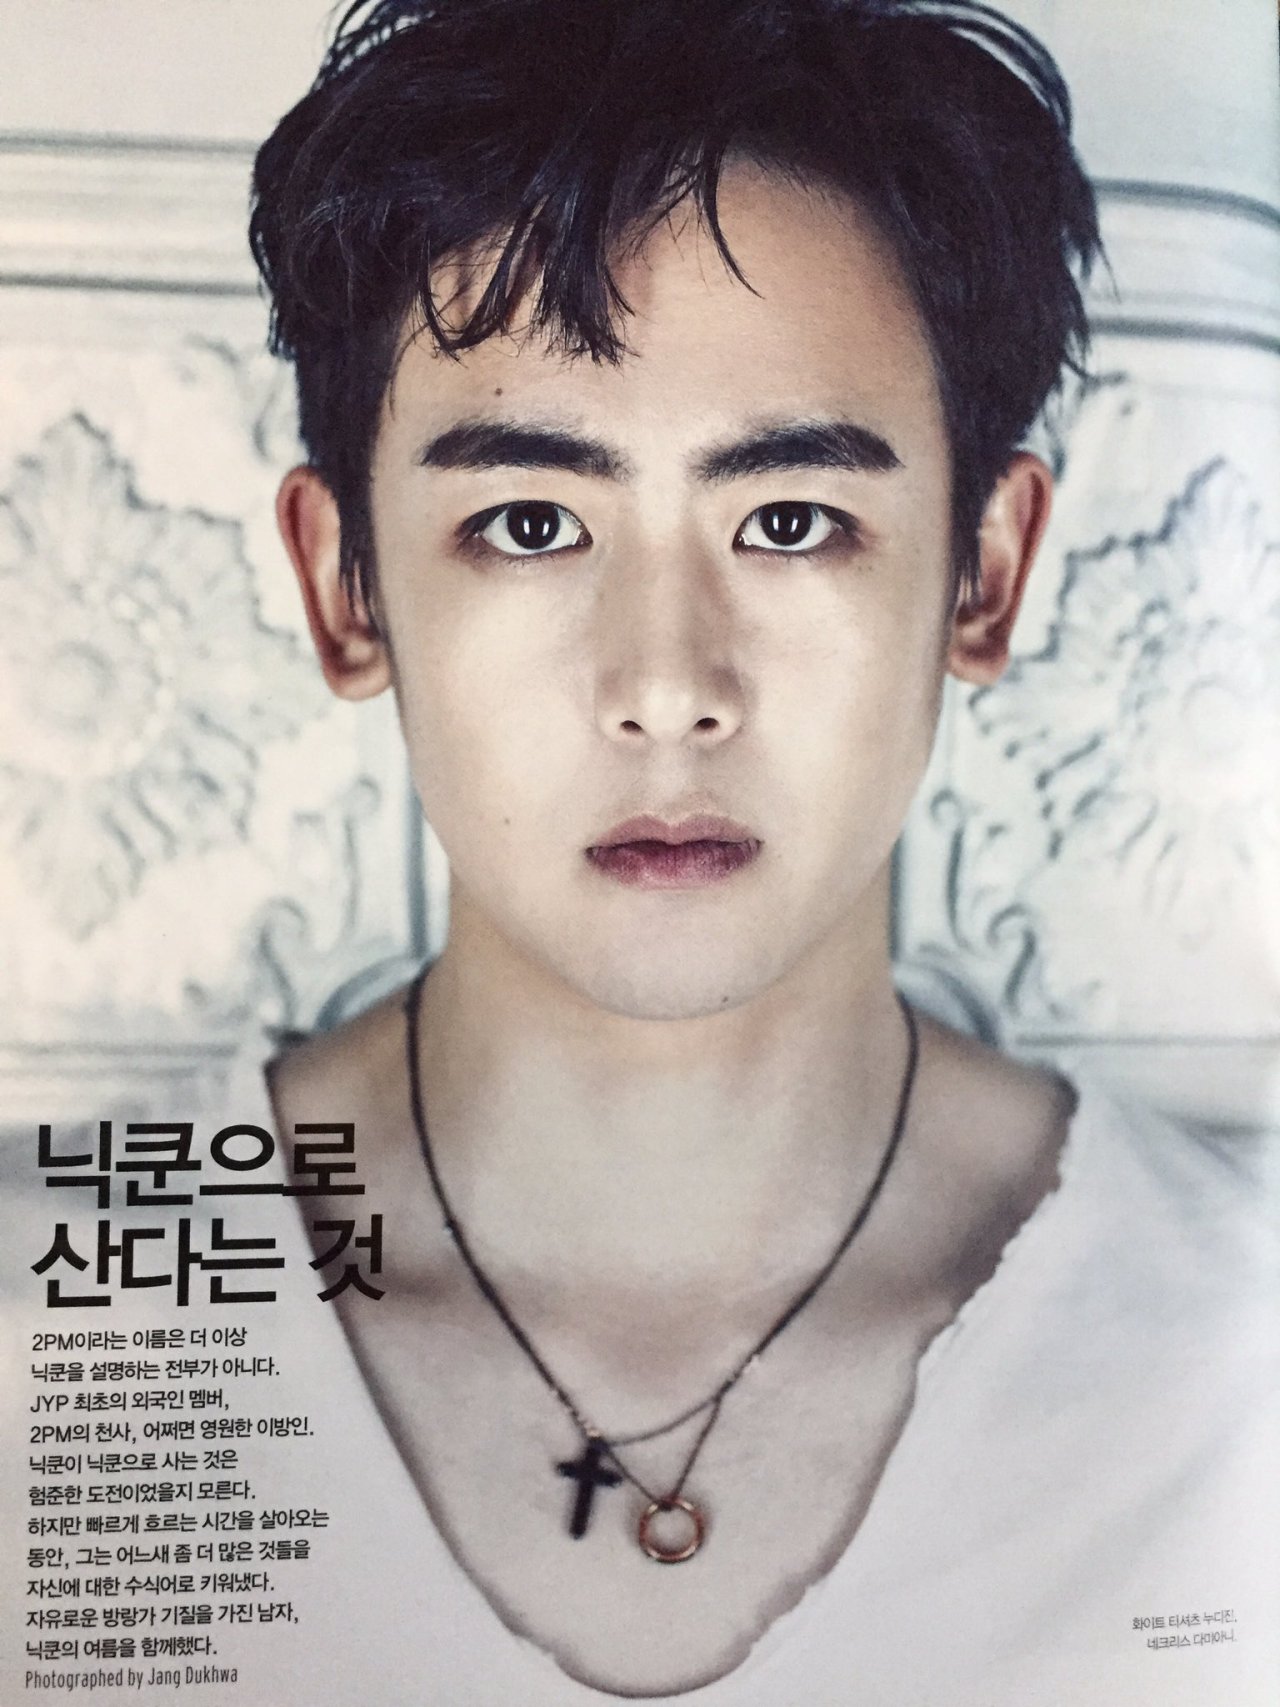 [TRANS] GEEK July 2016 Issue - Nichkhun
Kor-Eng Trans: @nuneo2daKAY
You look like an LA youngster who comes to Cuba for a vacation. You really suit this free-spirited place. Really. I really feel that I’m overseas here. The weather is also bright...